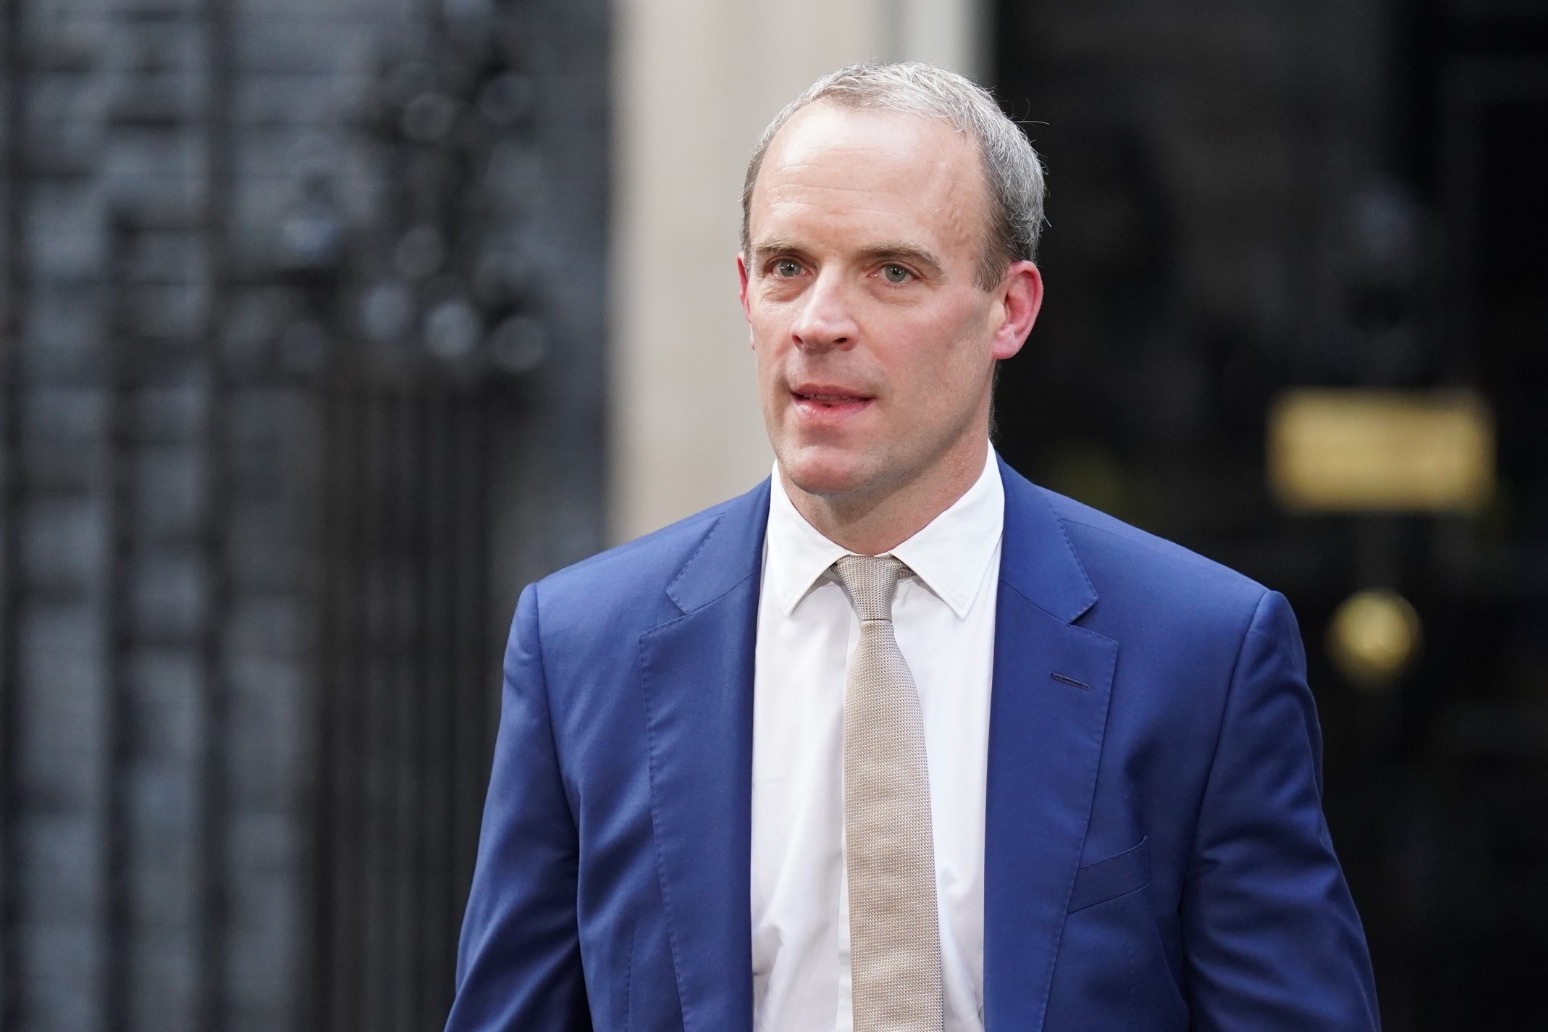 Why was Dominic Raab under investigation, and what will happen next? 